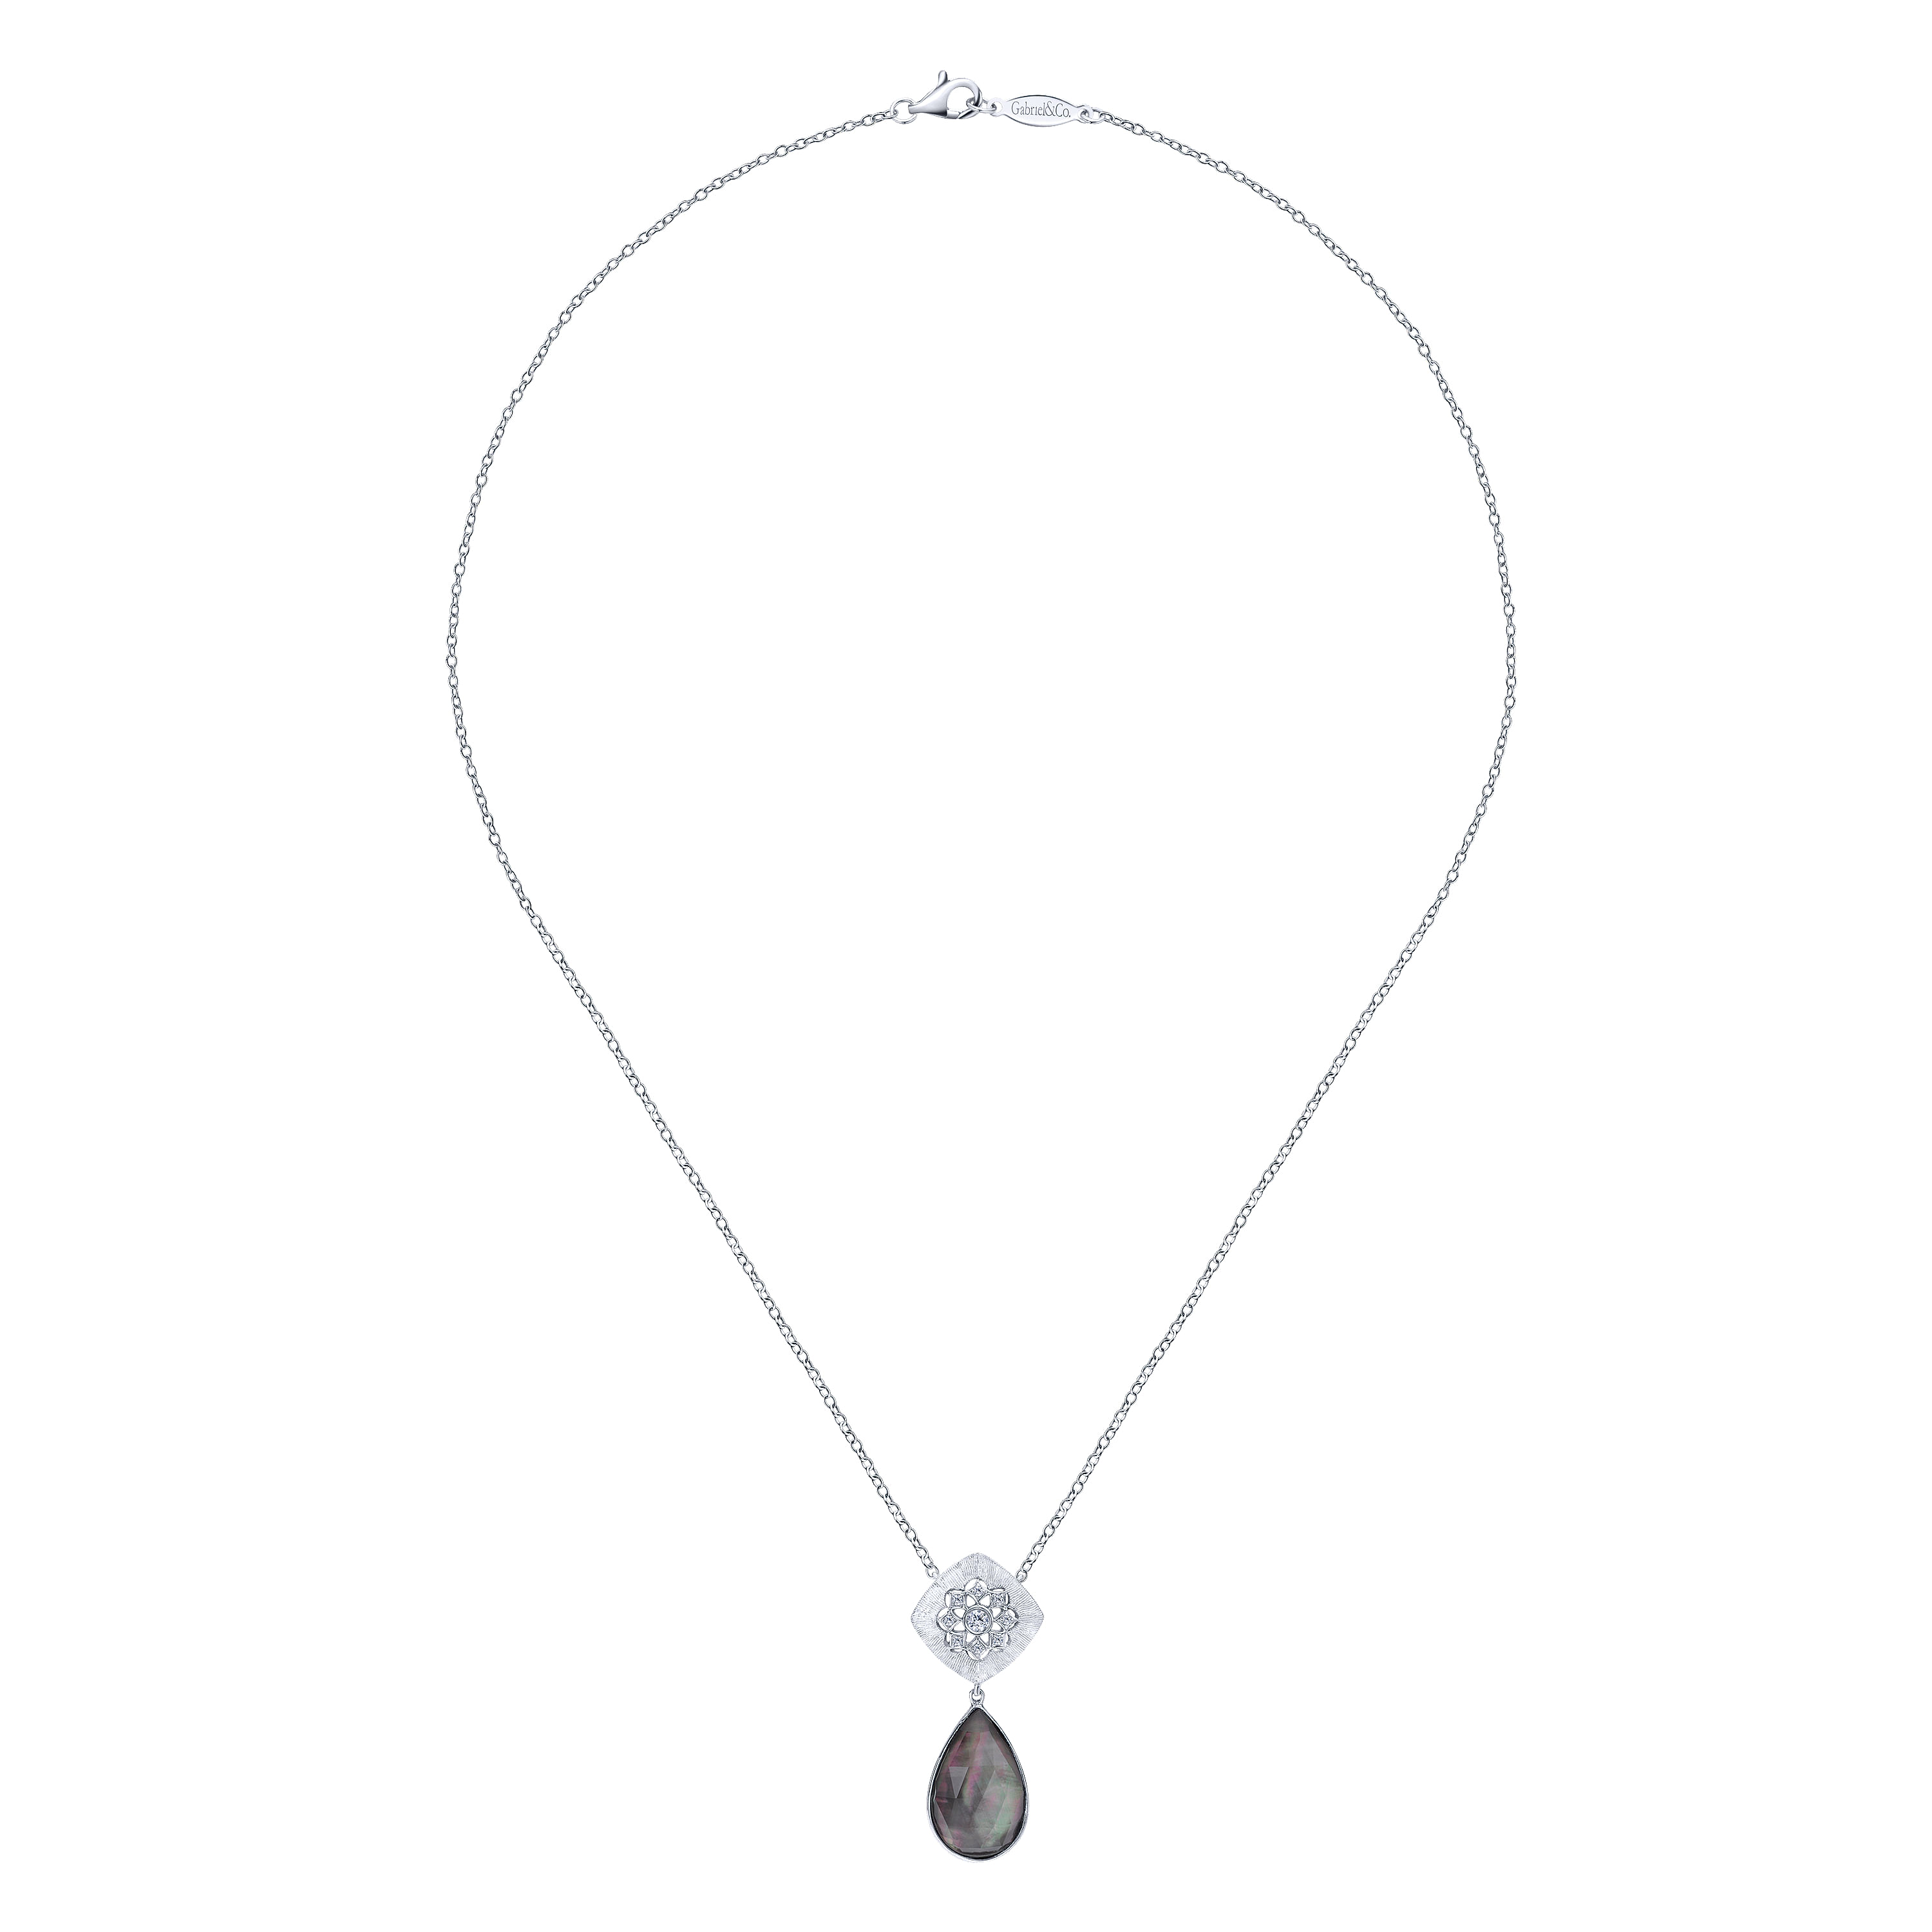 925 Sterling Silver Rock Crystal & Black MOP Doublet and White Sapphire Pendant Necklace